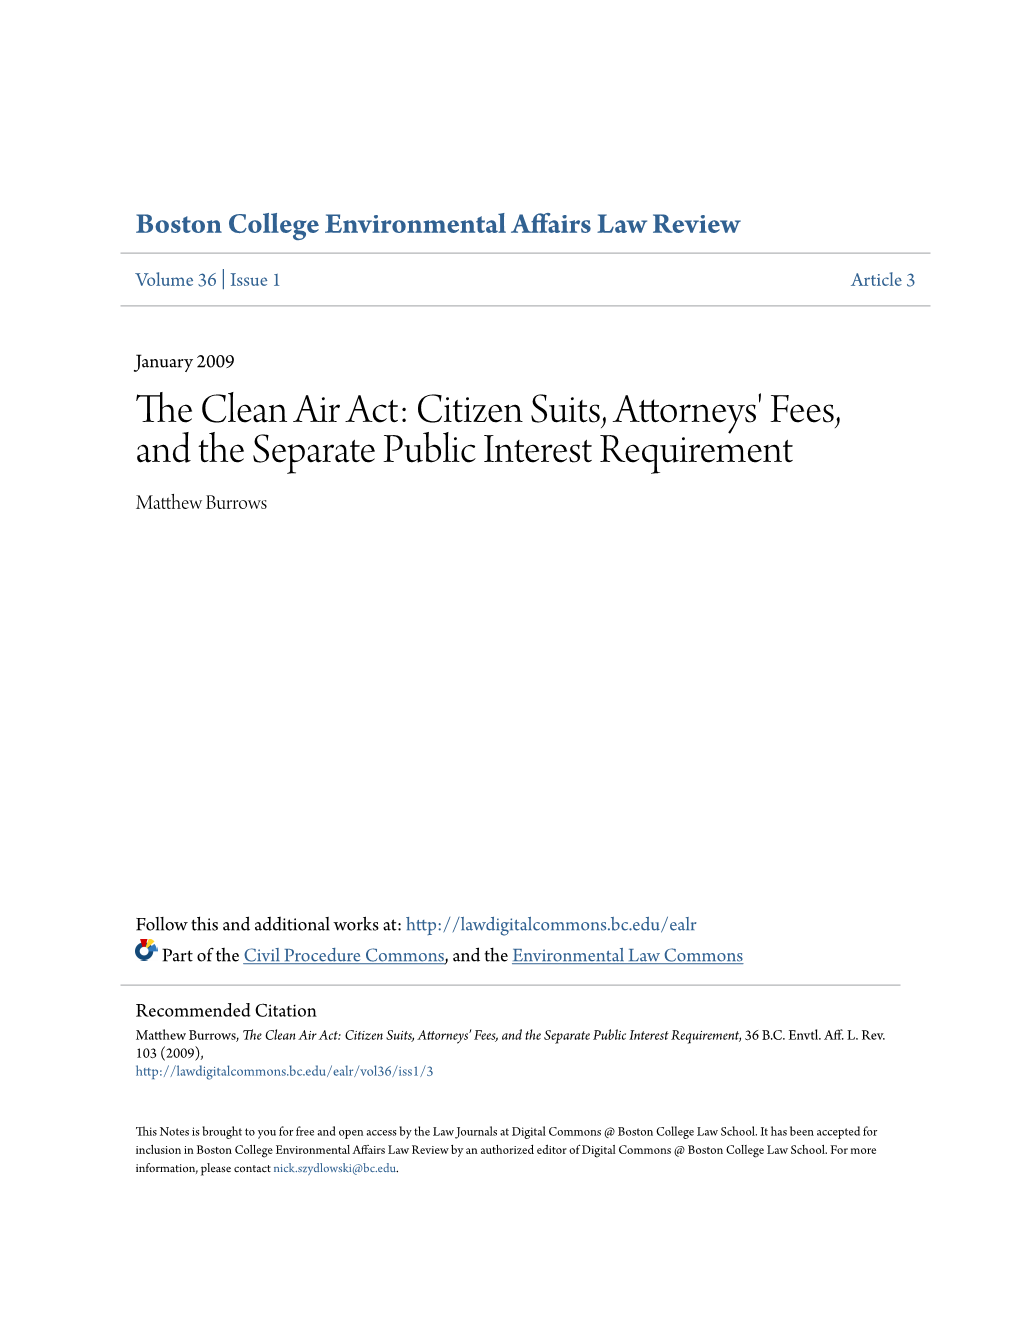 The Clean Air Act: Citizen Suits, Attorneys' Fees, and the Separate Public Interest Requirement, 36 B.C